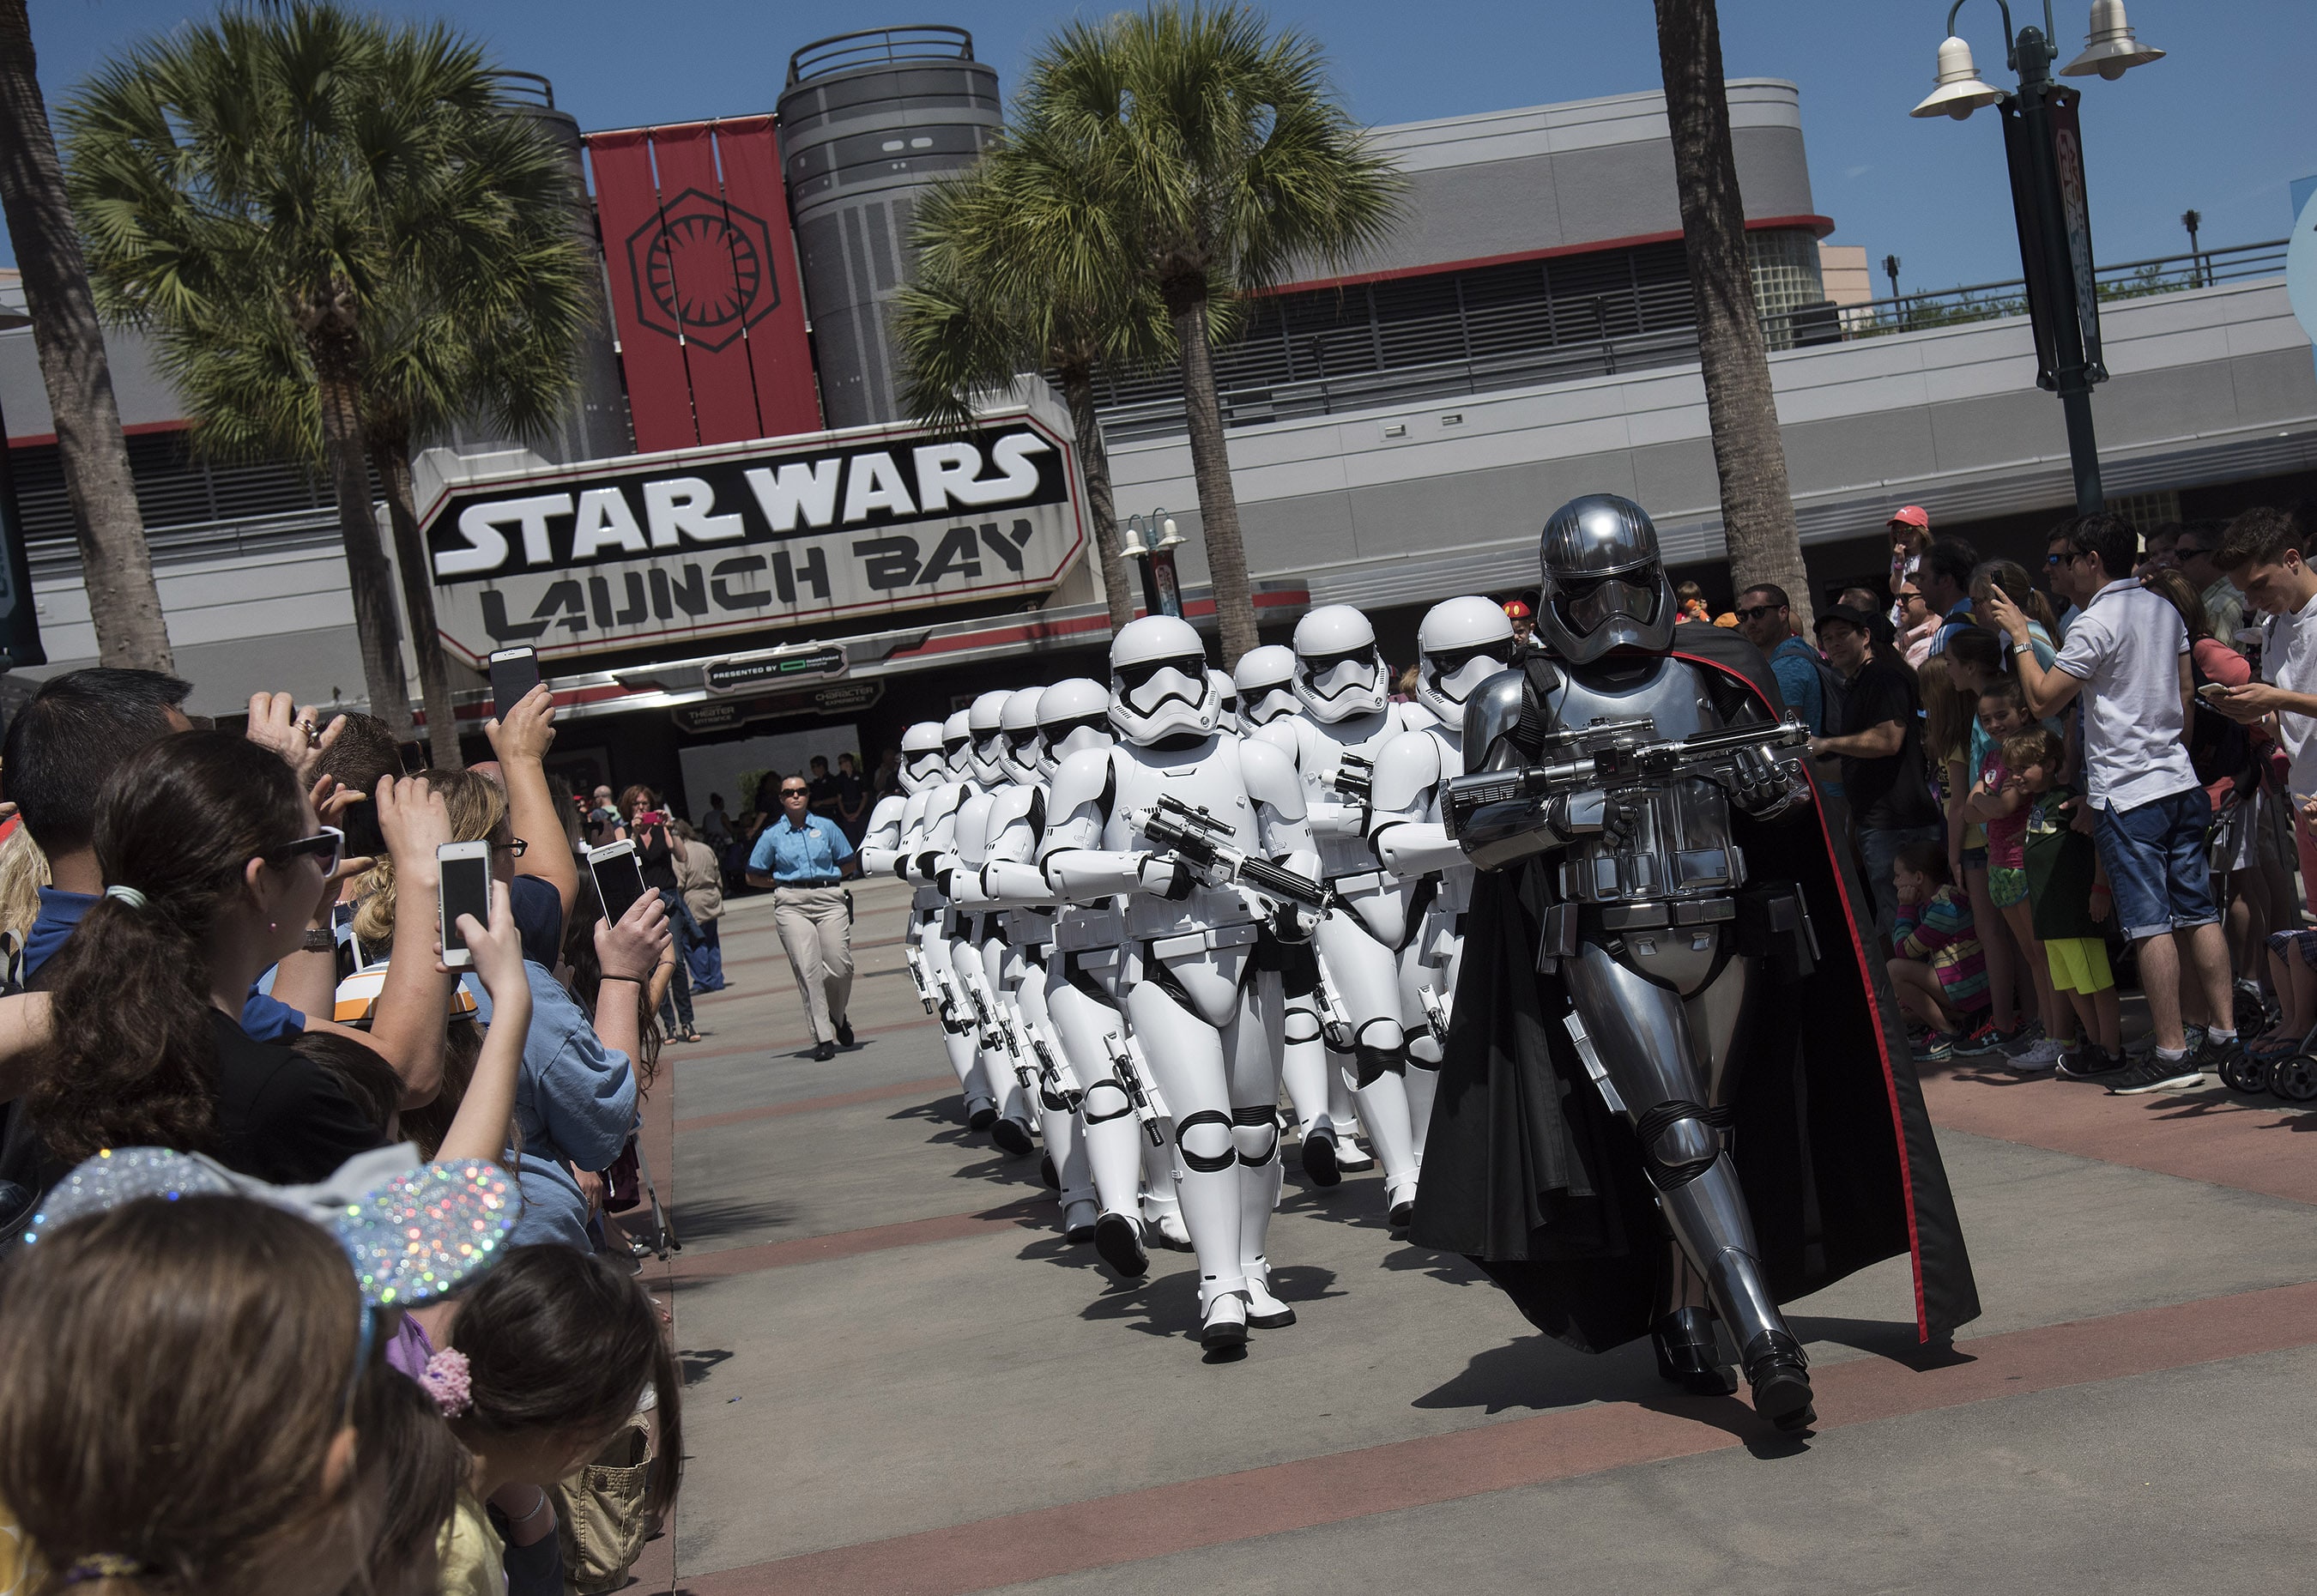 A Disney Star Wars Itinerary for Your Day At Hollywood Studios Mickey